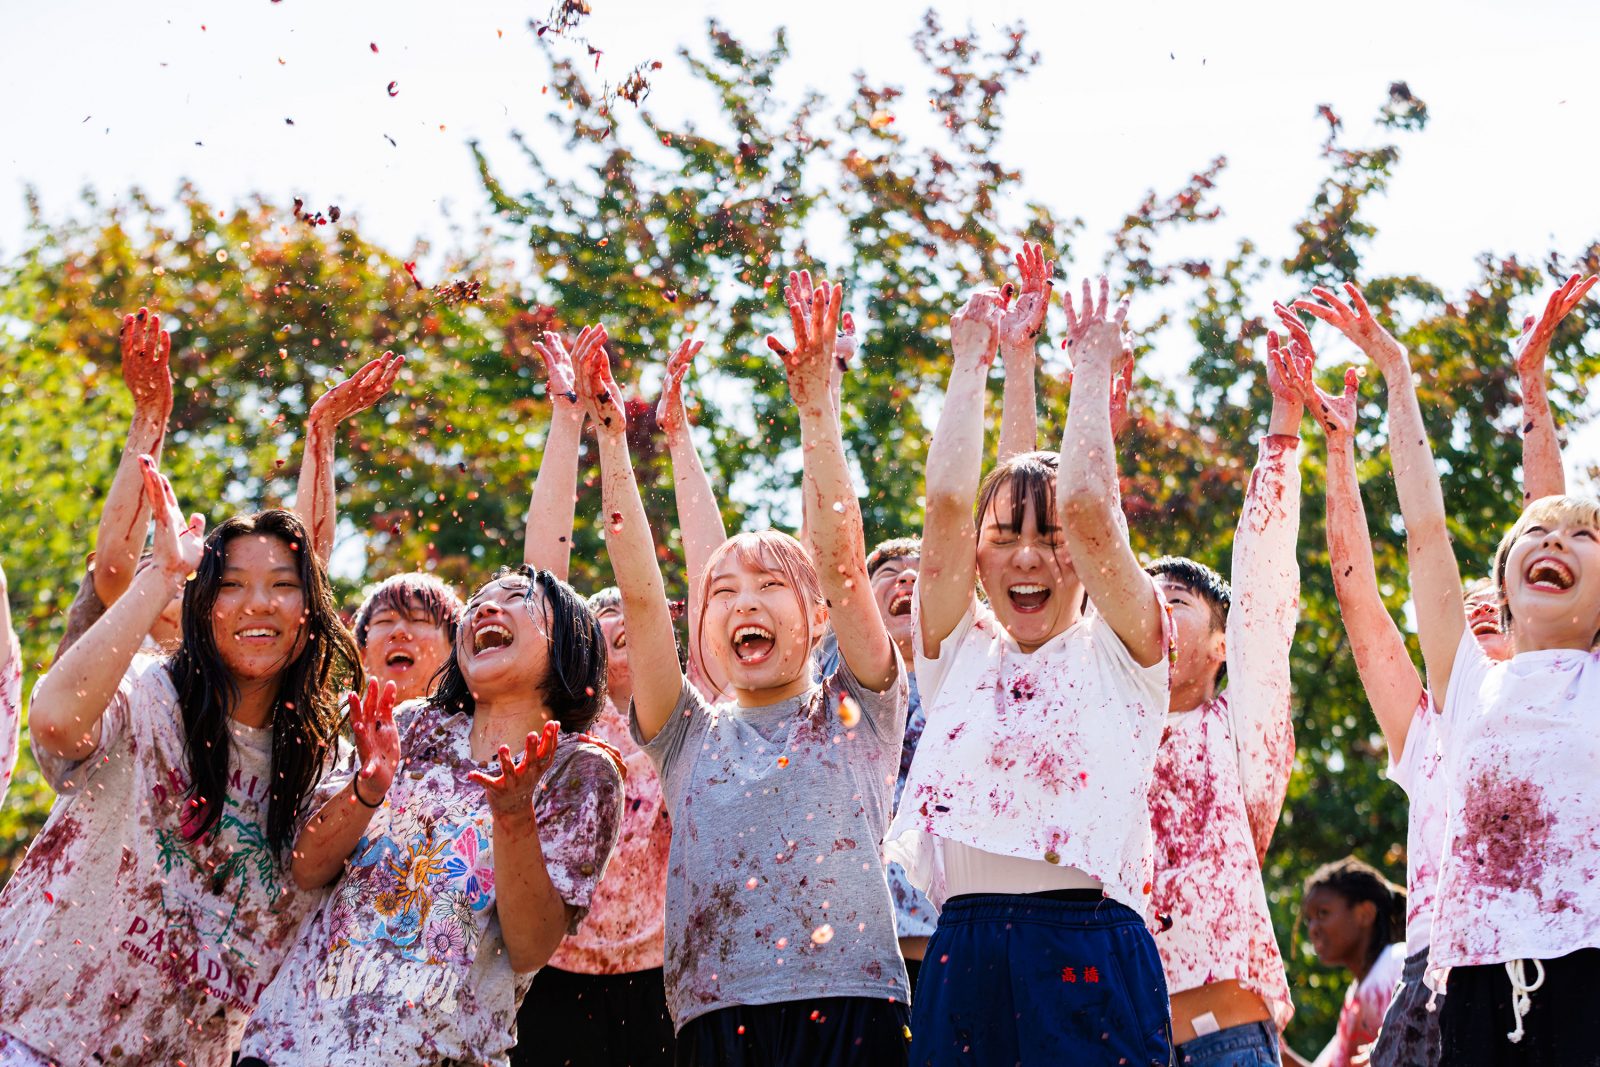 A group of women covered in grape juice toss grapes into the air.